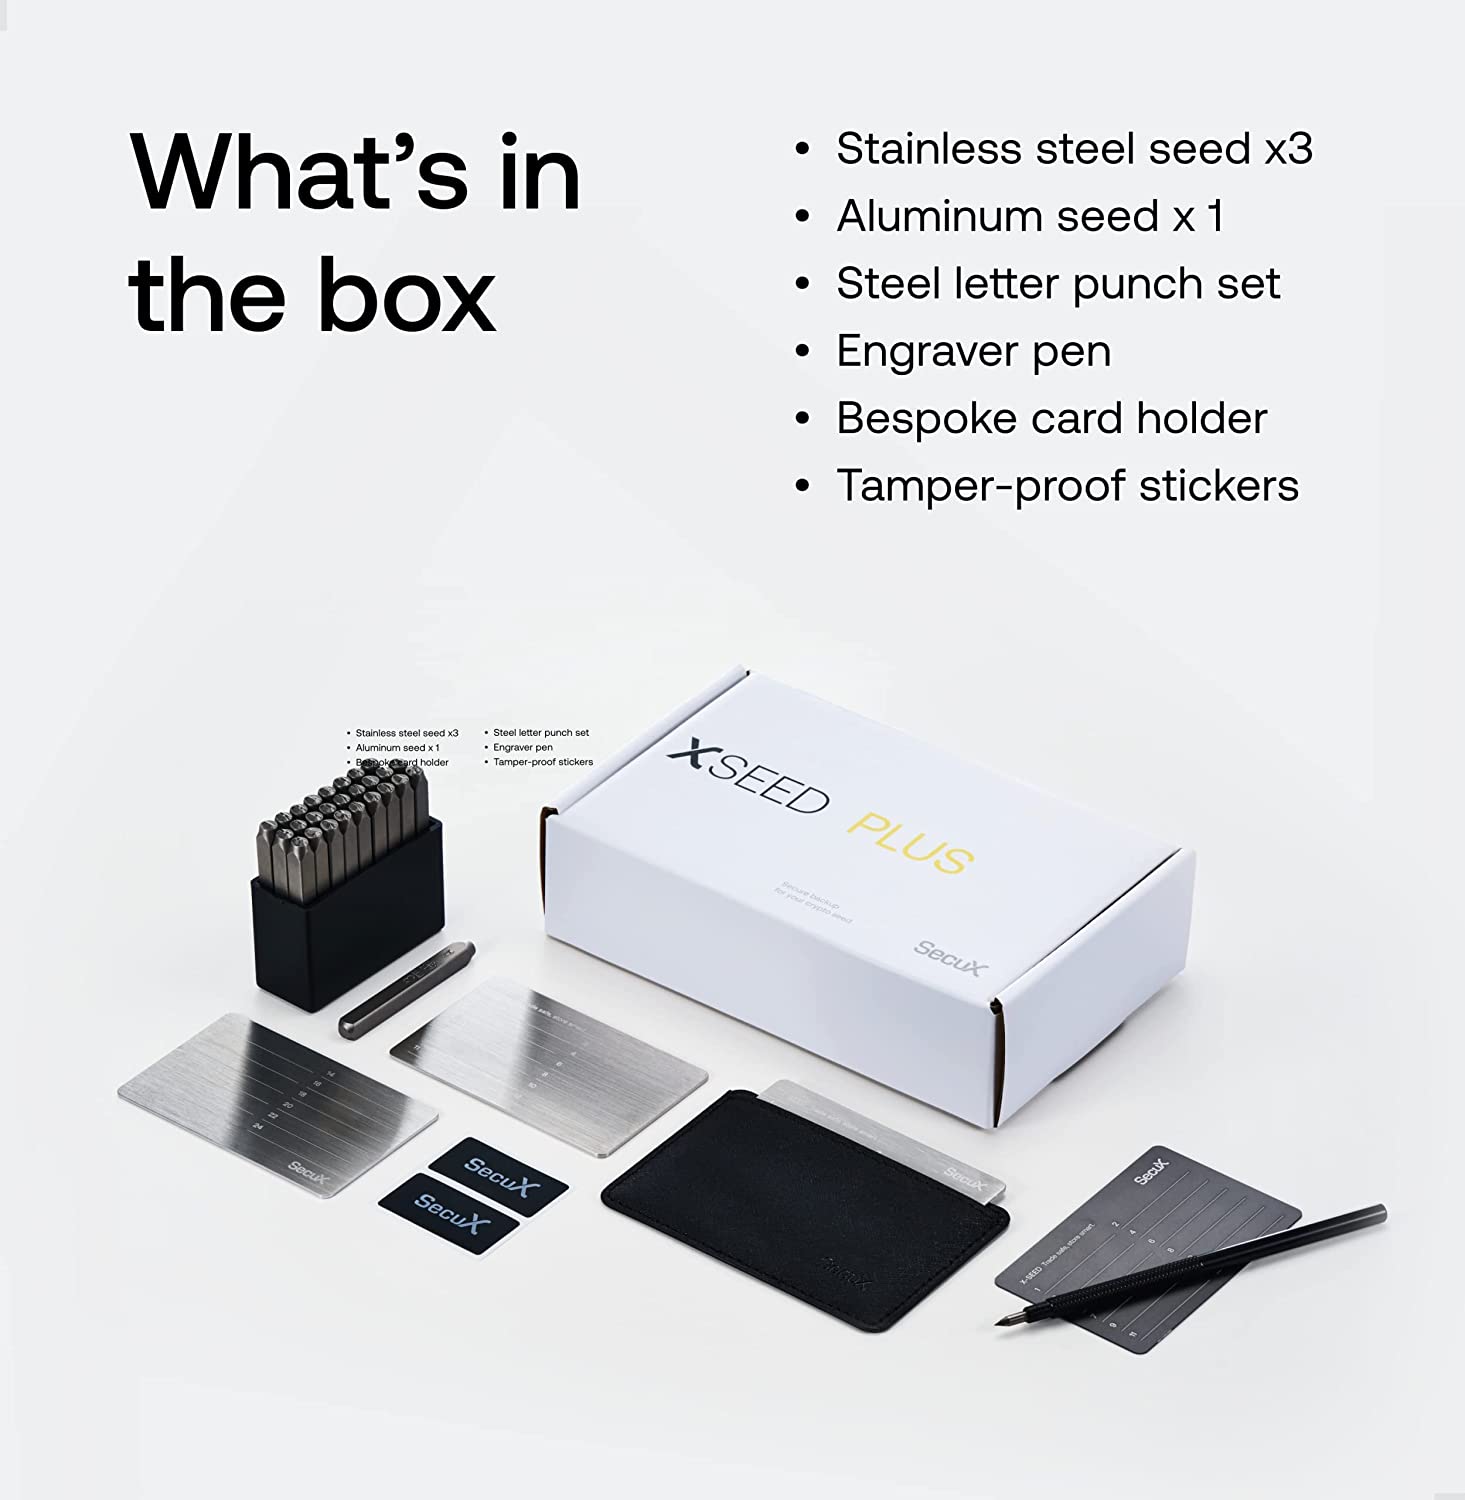 SecuX – XSEED Plus - Secure Bitcoin Wallet Crypto Seed Storage Steel Plates (Steel Punch Set Included) Compatible with SecuX, Ledger, Trezor Hardware Wallets - Pro-Distributing